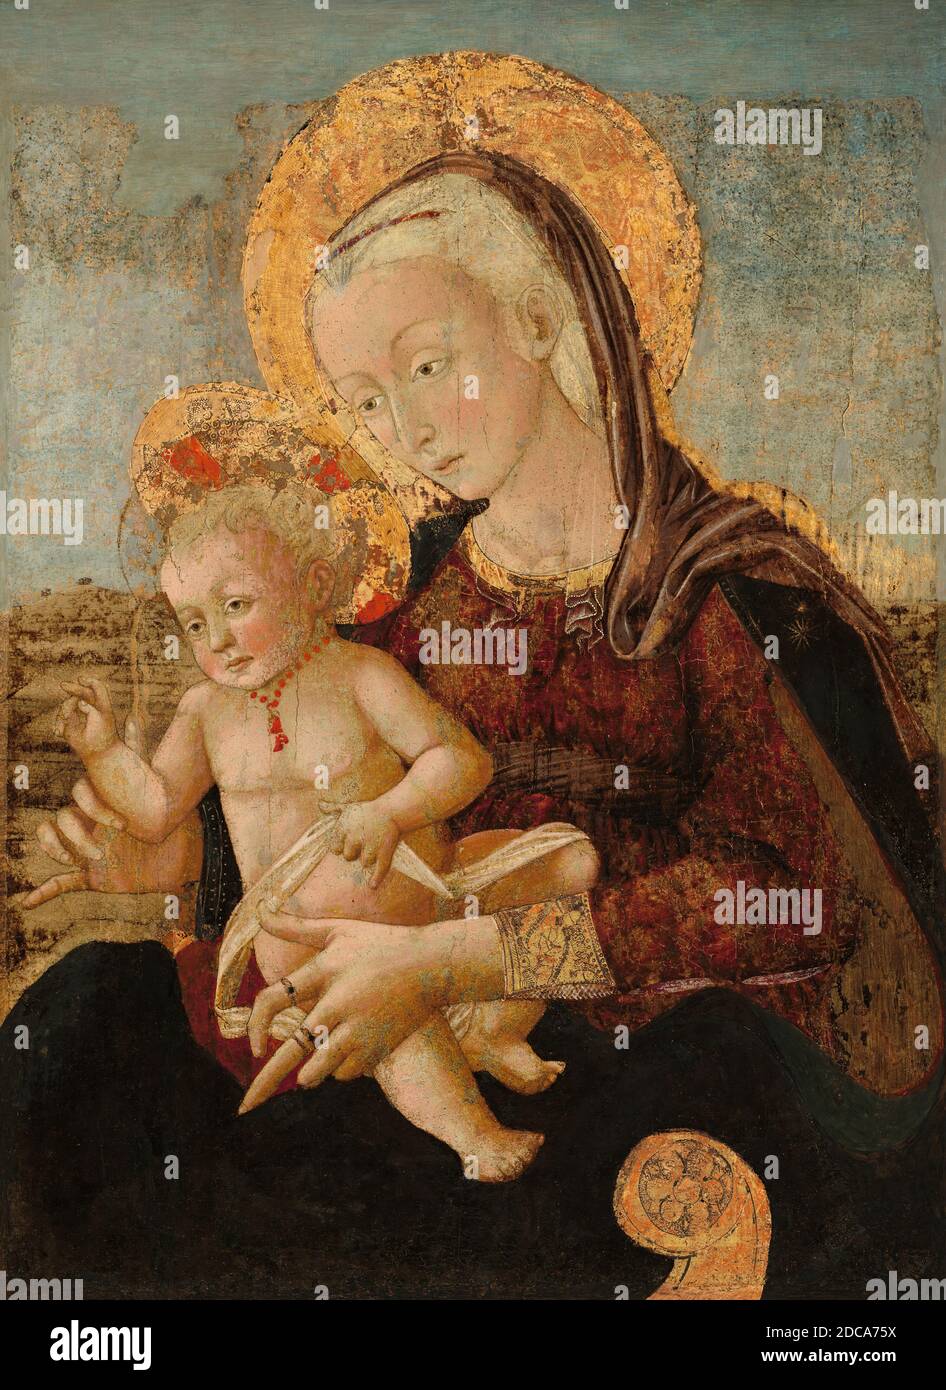 Pier Francesco Fiorentino, (painter), Florentine, 1444/1445 - after 1497, Madonna and Child, c. 1475, tempera on panel transferred to canvas, overall: 79.5 x 60 cm (31 5/16 x 23 5/8 in Stock Photo